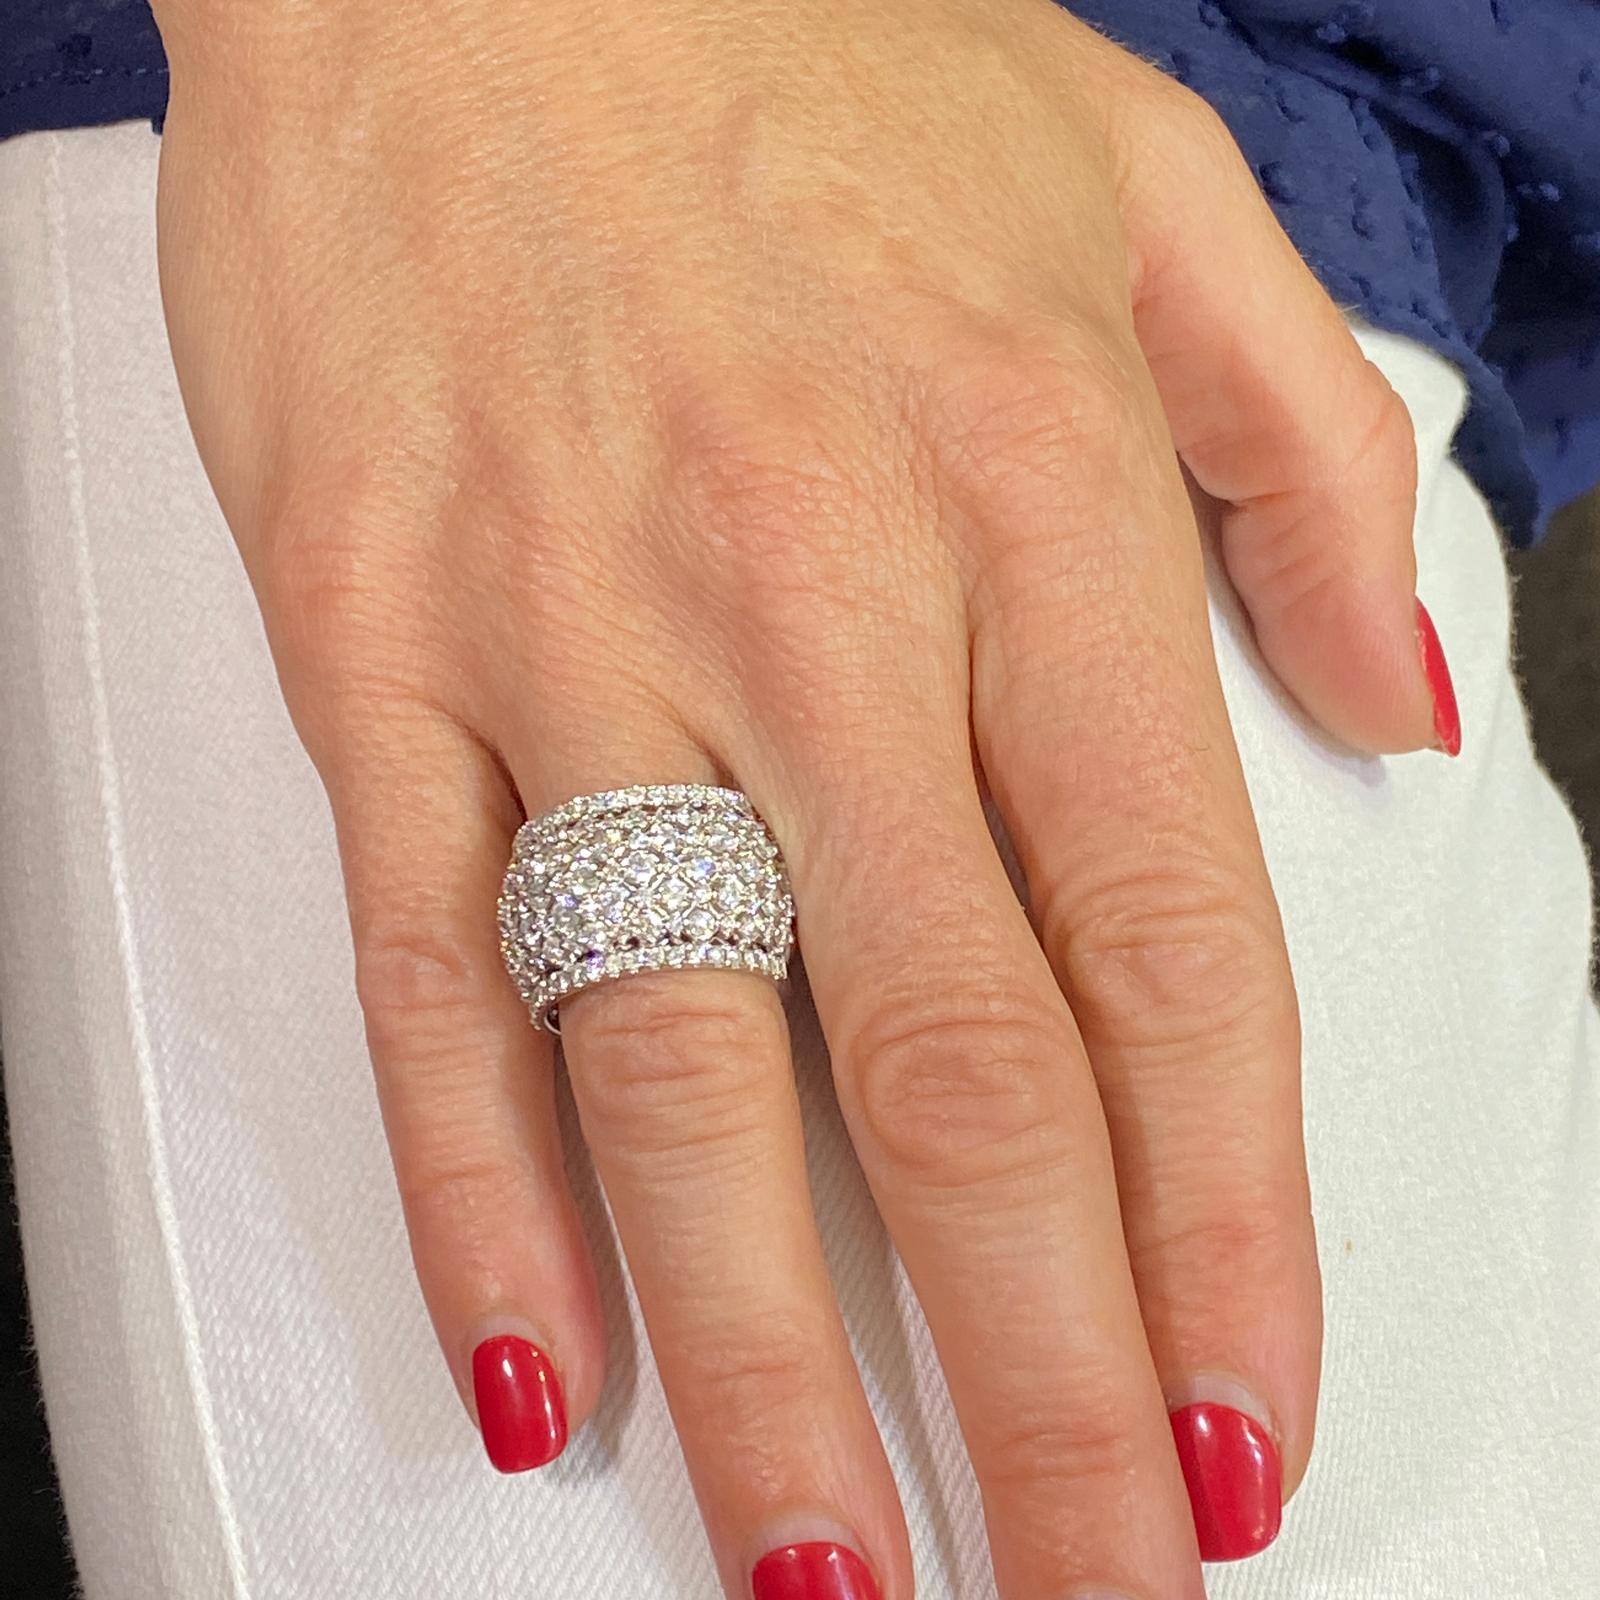 Beautiful diamond lattice band fashioned in 18 karat white gold. The wide band features round brilliant cut diamonds weighing 4.00 carat total weight and graded G-H color and VS2-SI1 clarity. The wide band measures 14.5mm in width and is currently